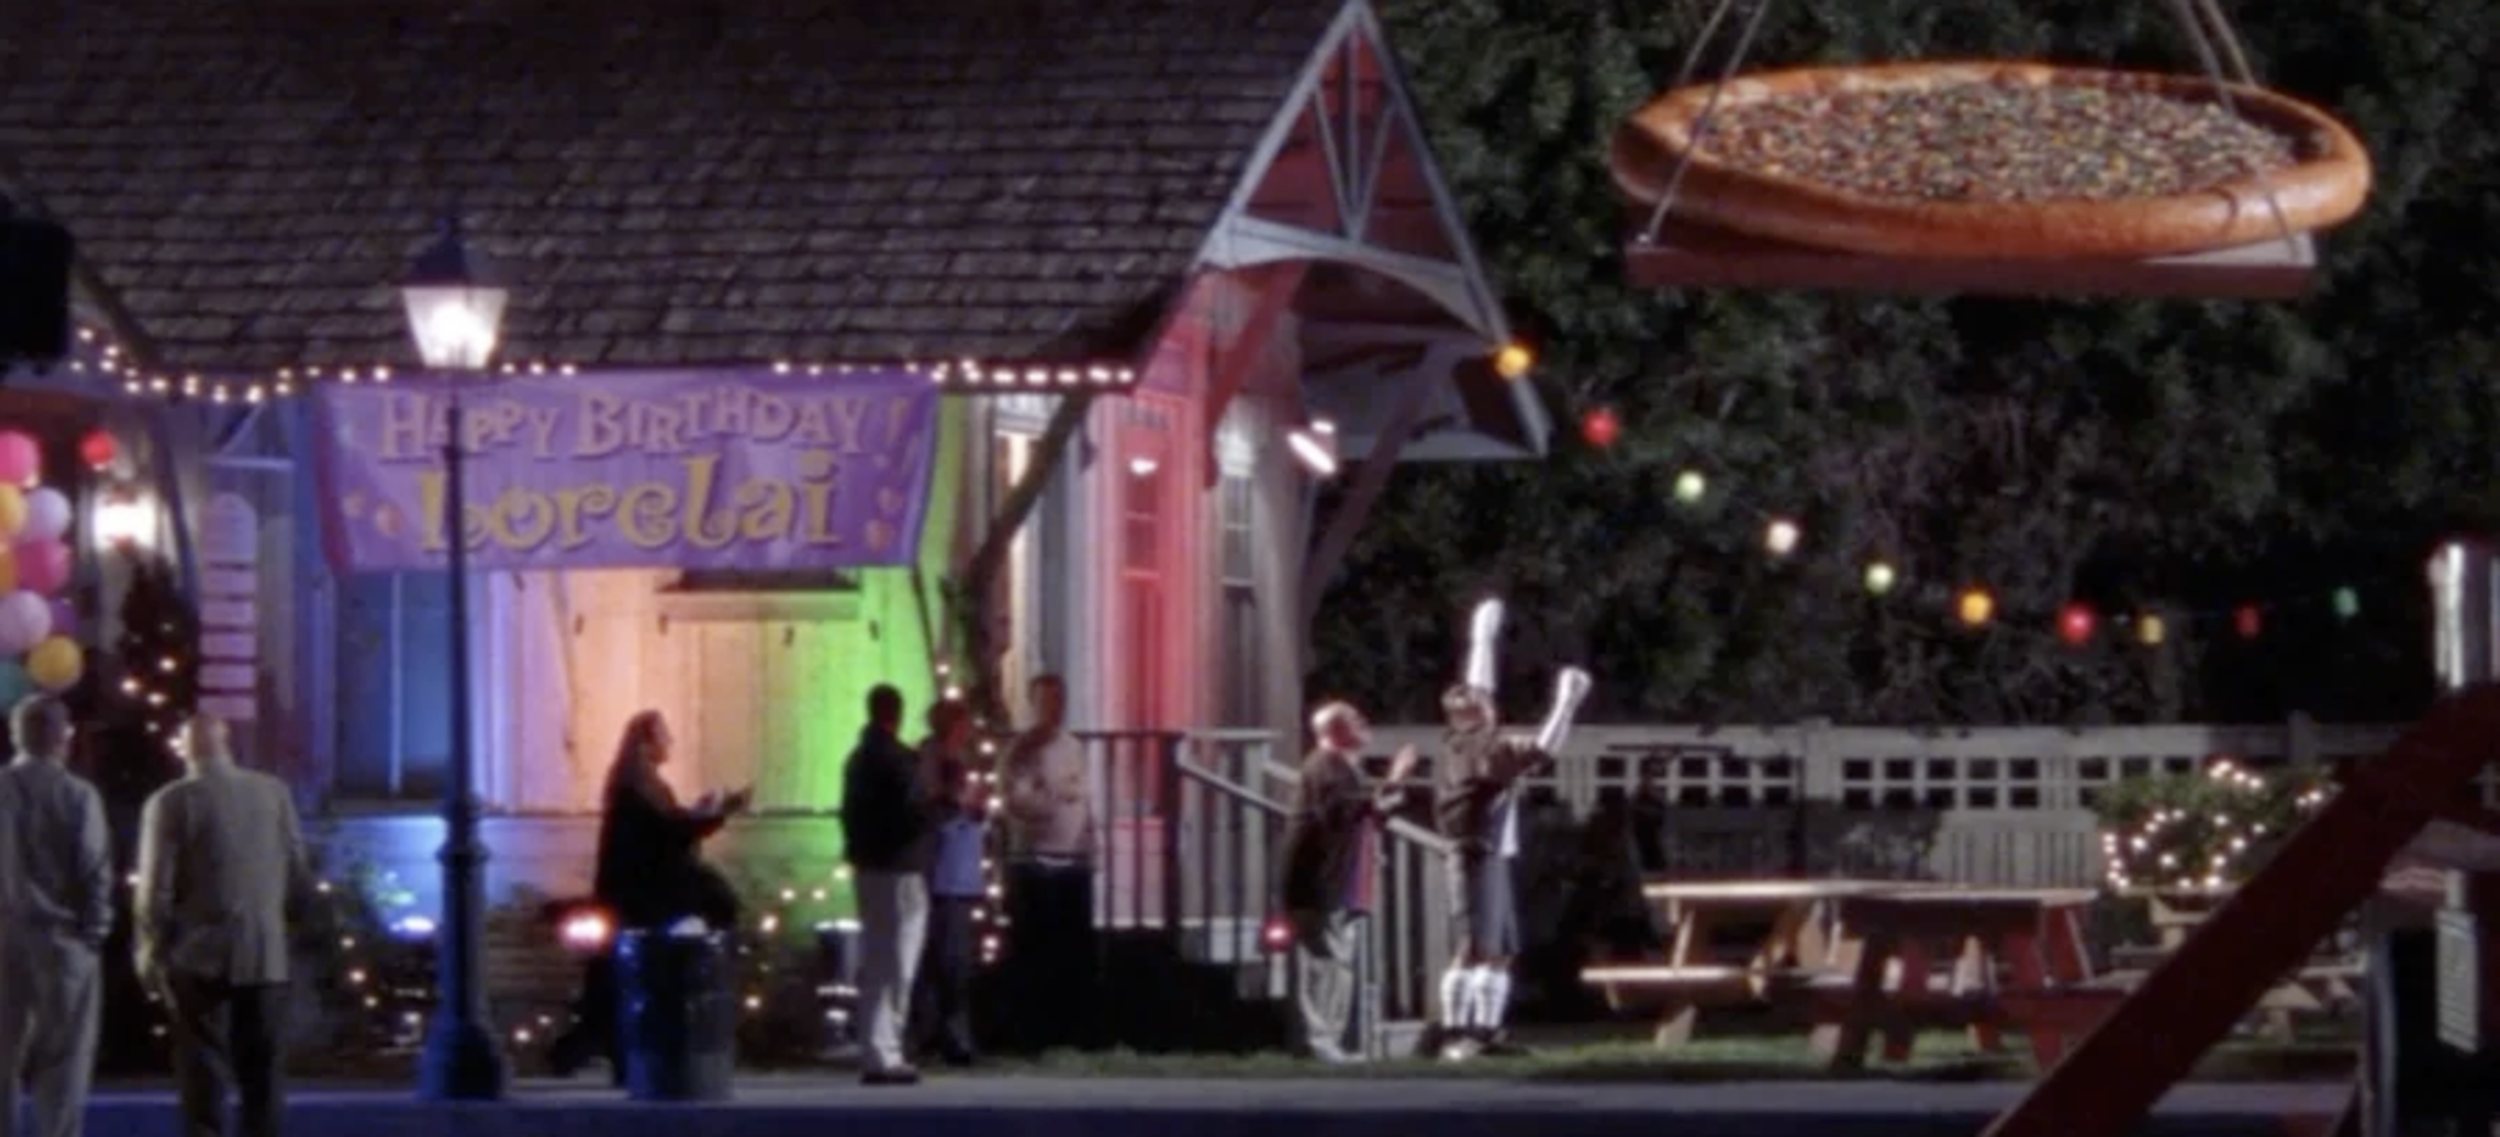 <p>Antonioli's<span> hardly played a prominent role in the long run of the <em>Gilmore Girls</em>. However, its window was often visible from the streets of the Stars Hollow. Antonioli's 15 minutes of fame remains one of the most memorable moments in the series' history. In celebration of Lorelai's 35th birthday, Rory (Alexis Bledel) asks Pete, Antonioli's apparent manager, to create and cook up the "world's largest pizza." Or at least one that's bigger than that made in nearby Woodbridge. The task is quite Herculean. So much so that lovable helper Kirk (Sean Gunn) is severely burned in the process.</span></p><p>You may also like: <a href='https://www.yardbarker.com/entertainment/articles/20_of_the_most_heartbreaking_tv_episodes_030724/s1__40038181'>20 of the most heartbreaking TV episodes</a></p>